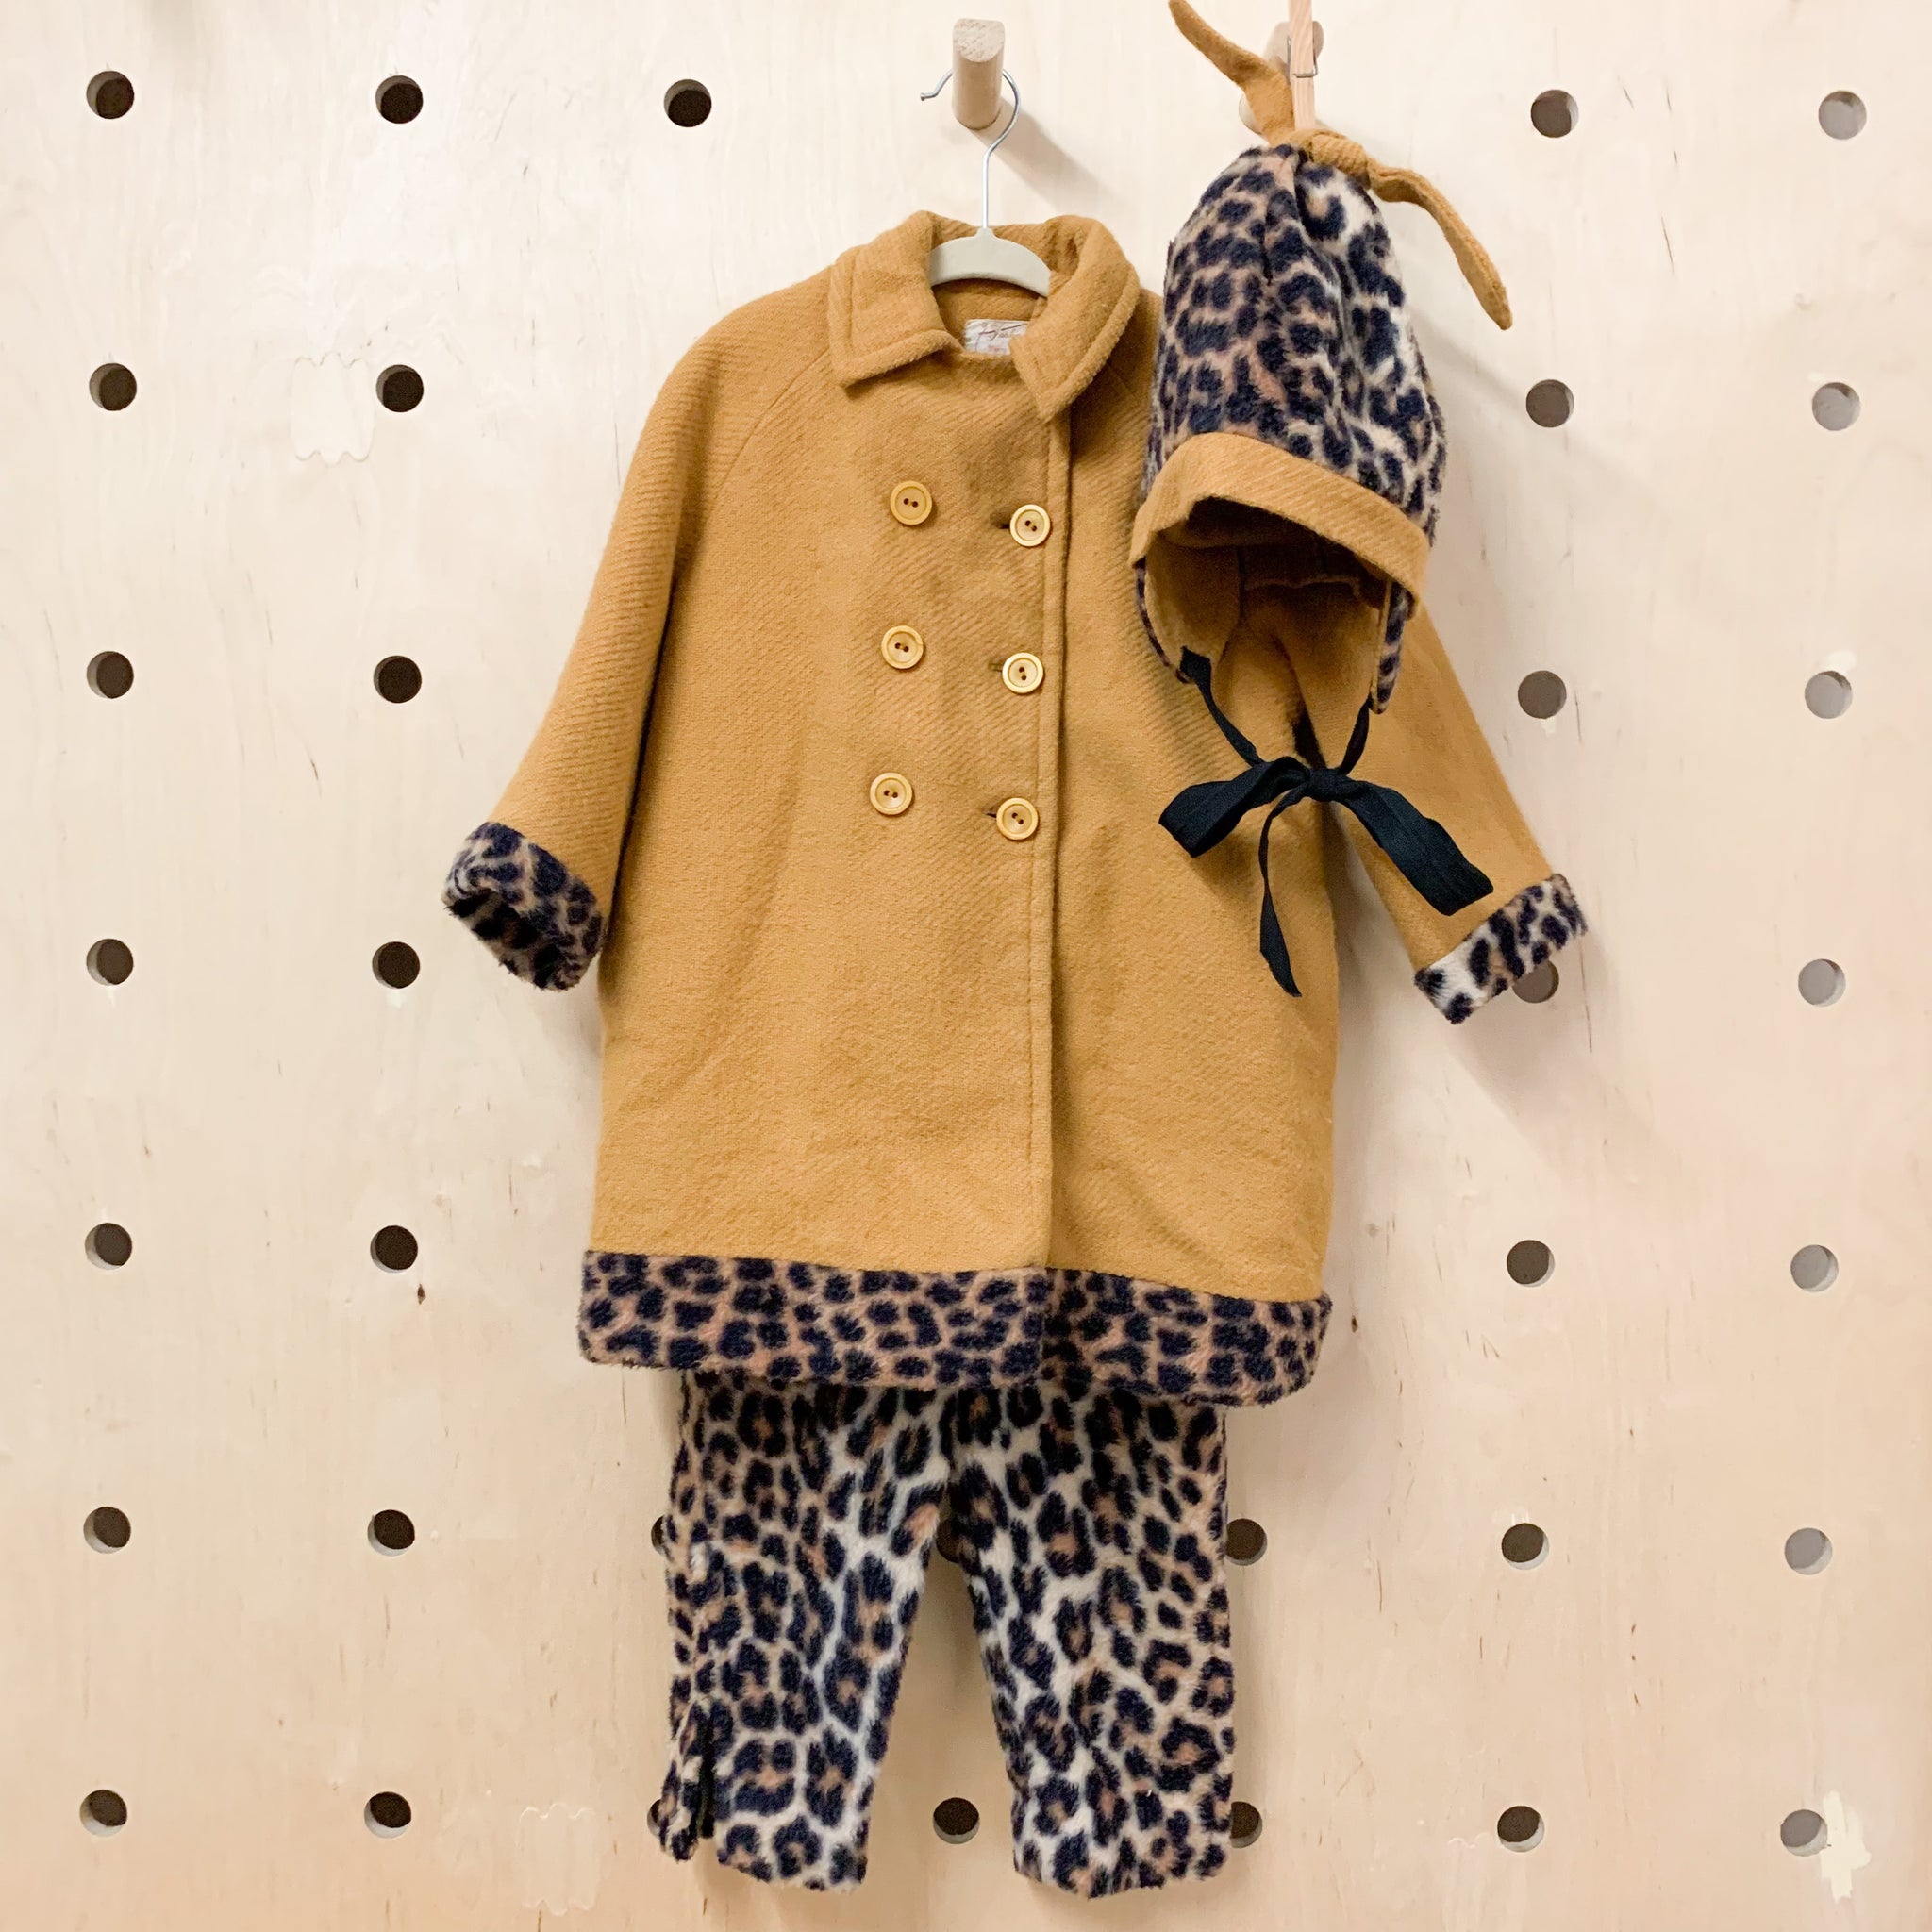 Vintage 1960s Mustard & Faux Fur Leopard Winter Coat with pants and hat / size 4T